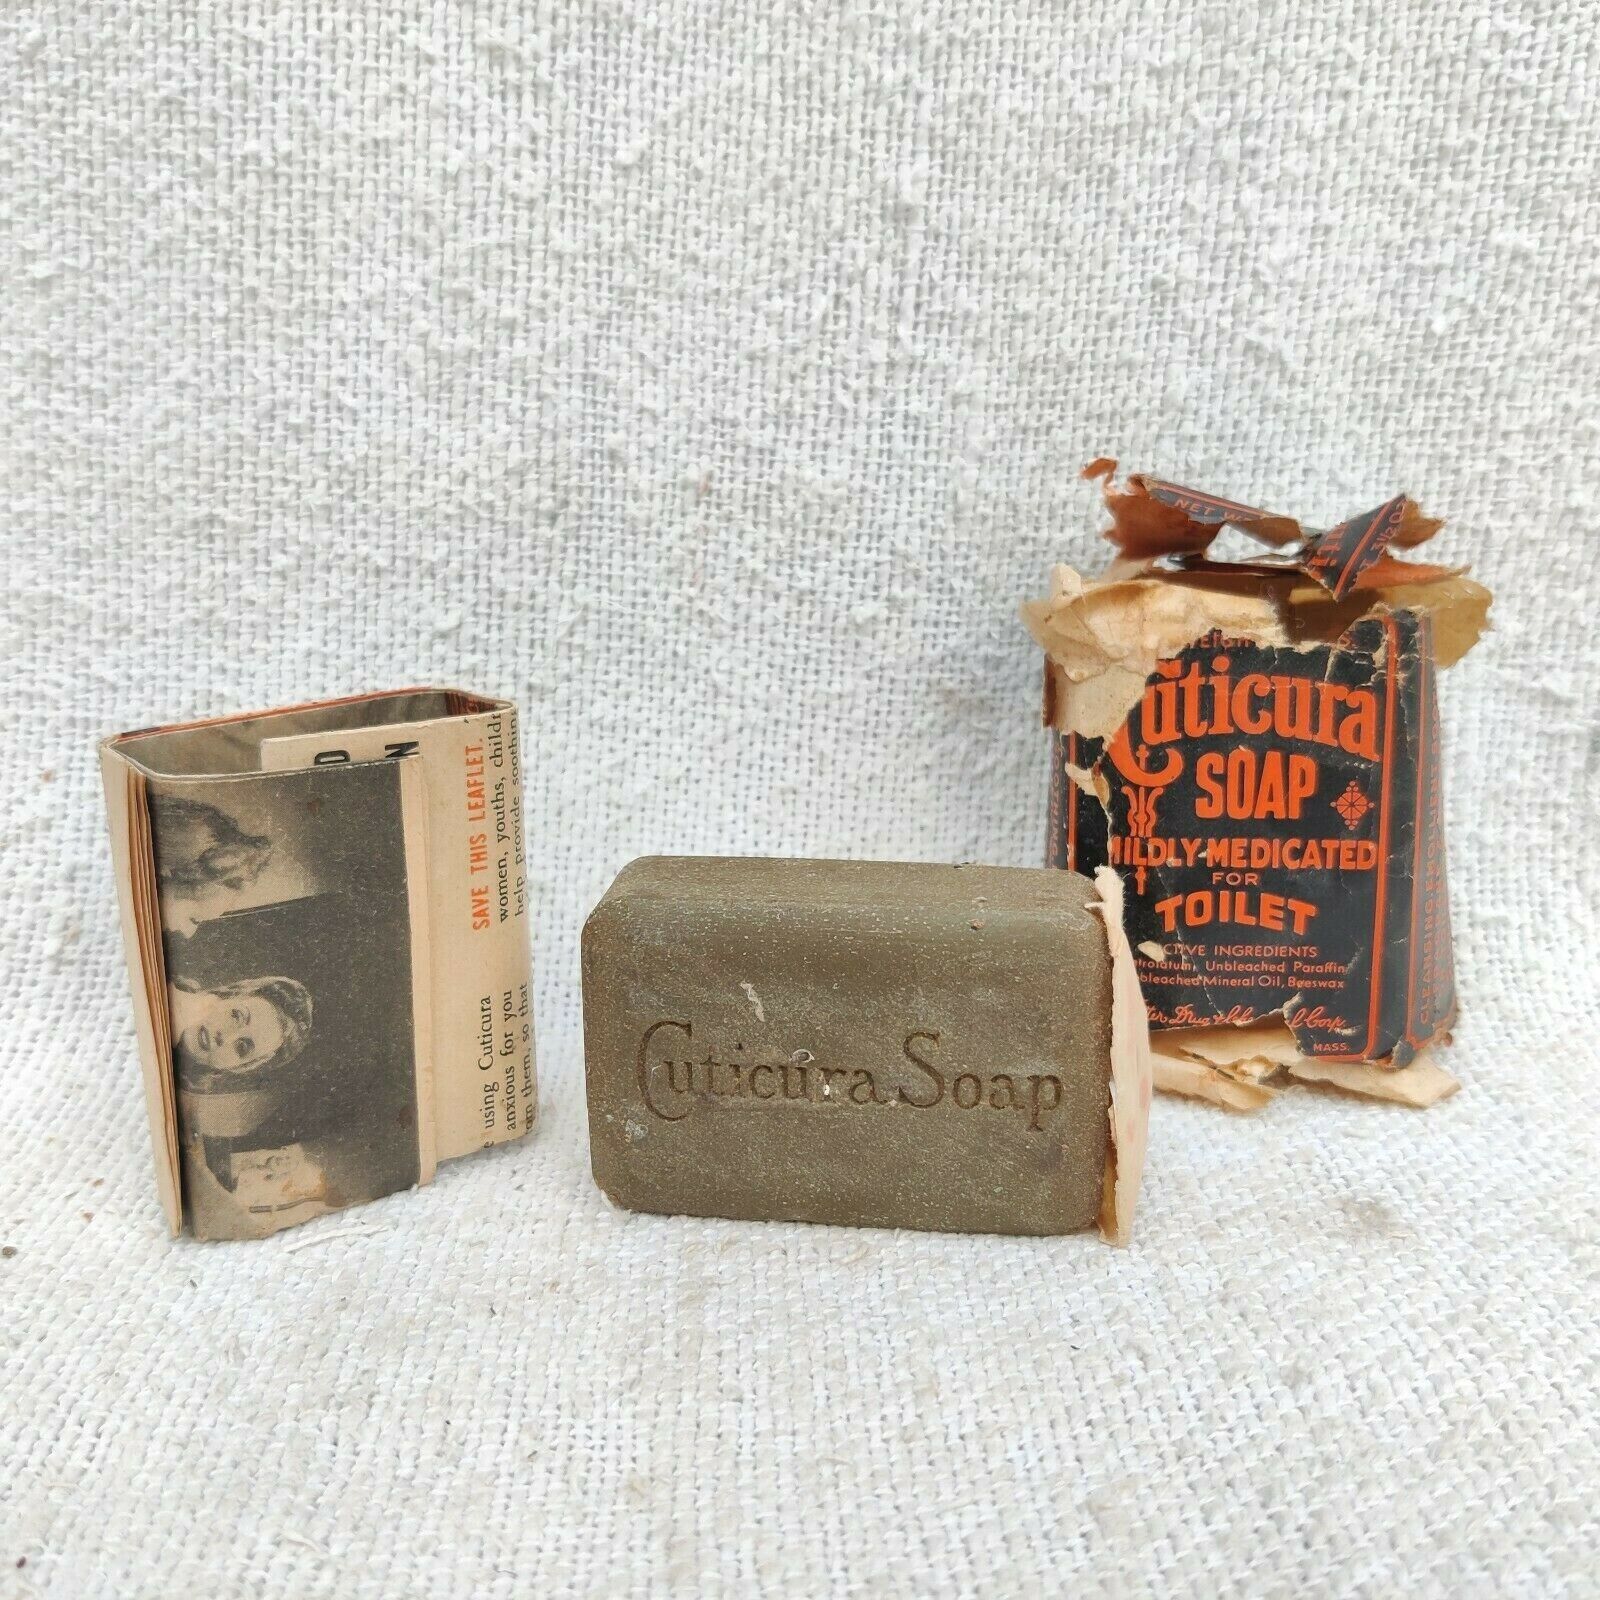 1930 Vintage Potter Drug & Chemical Corp Cuticura Bath Soap Packed Boston U.S.A.